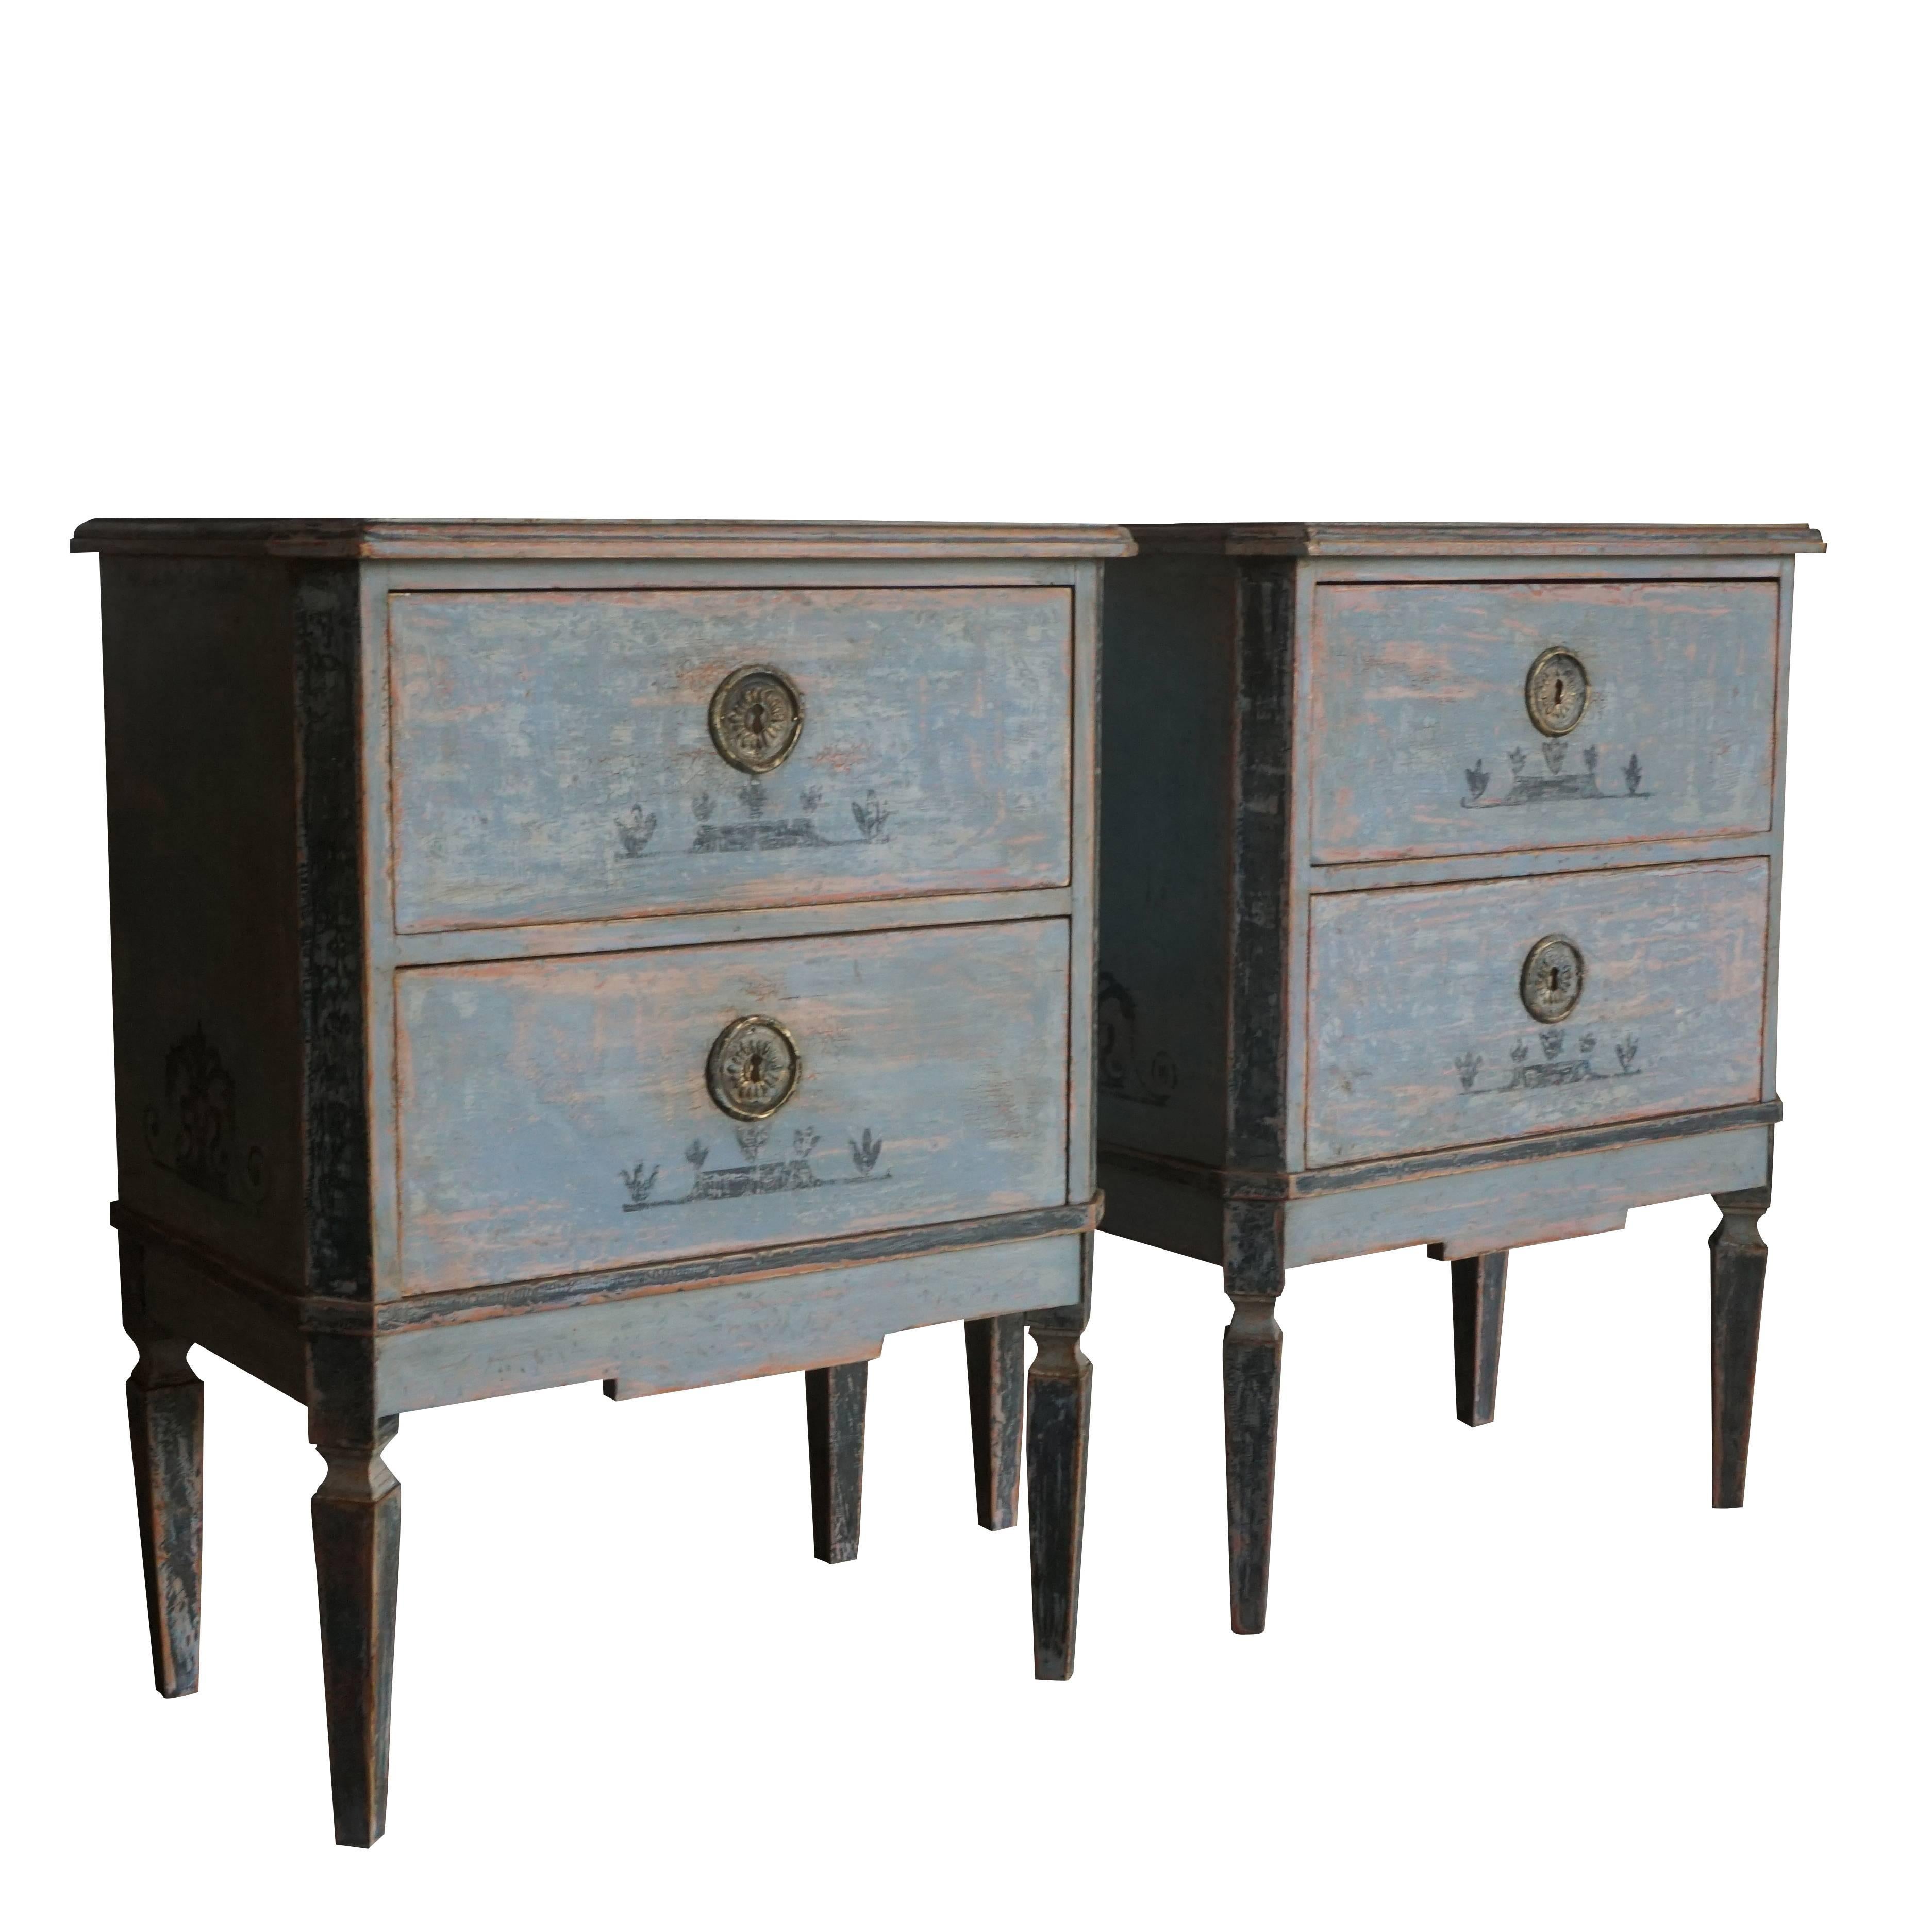 A pair of restored Swedish chests of drawers in a light blue-grey painted finish with hand-painted decoration, antique hardware and fluted legs, circa 1870.